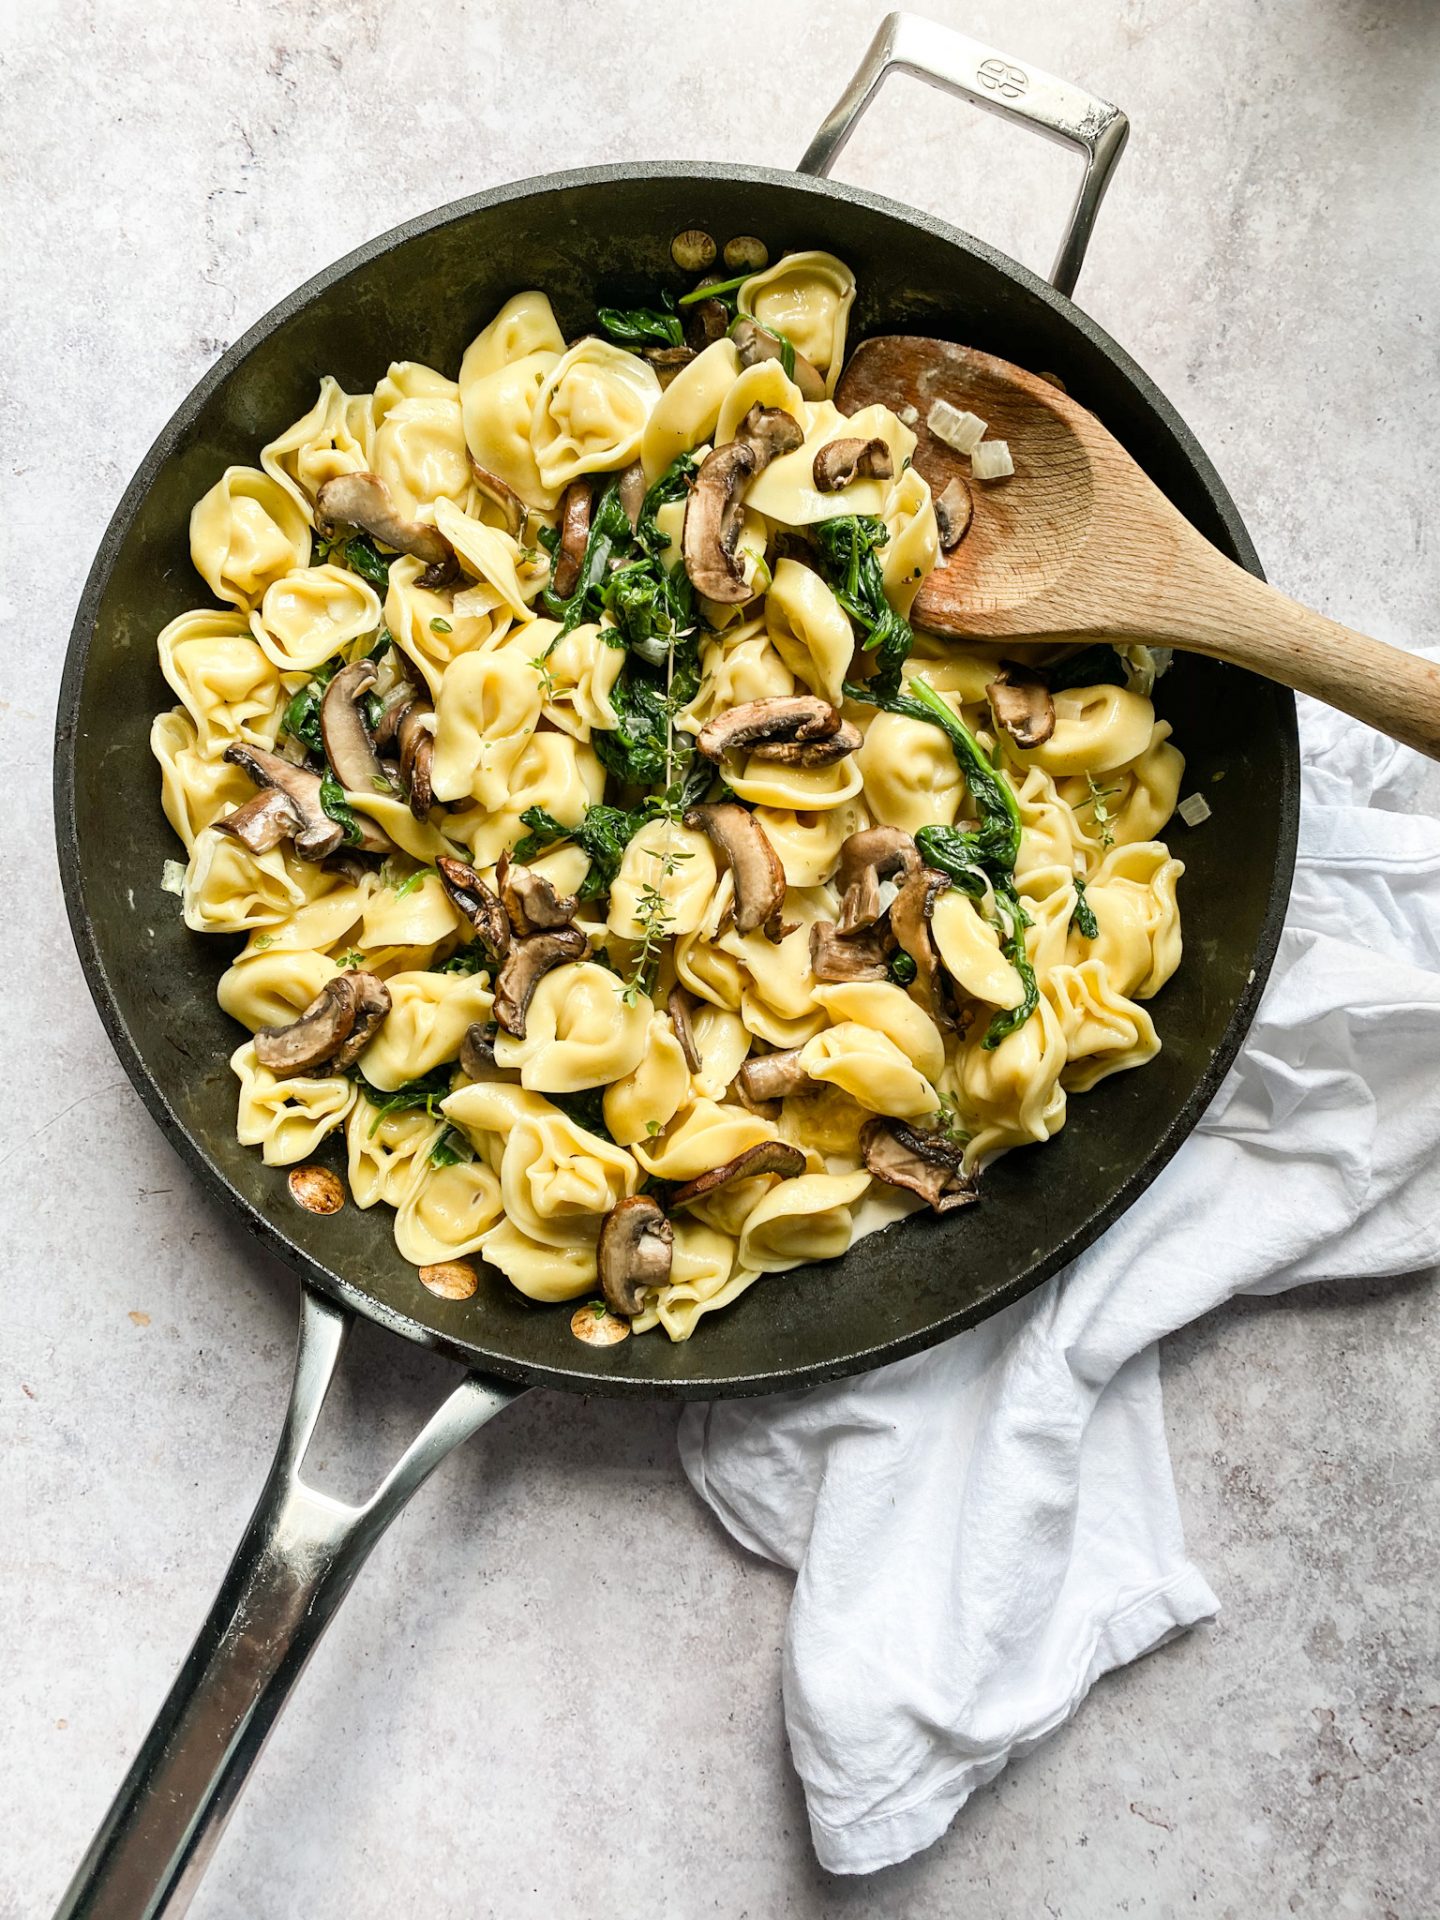 Chocolate and Lace Shares her recipe for Creamy Mushroom and Spinach Tortellini